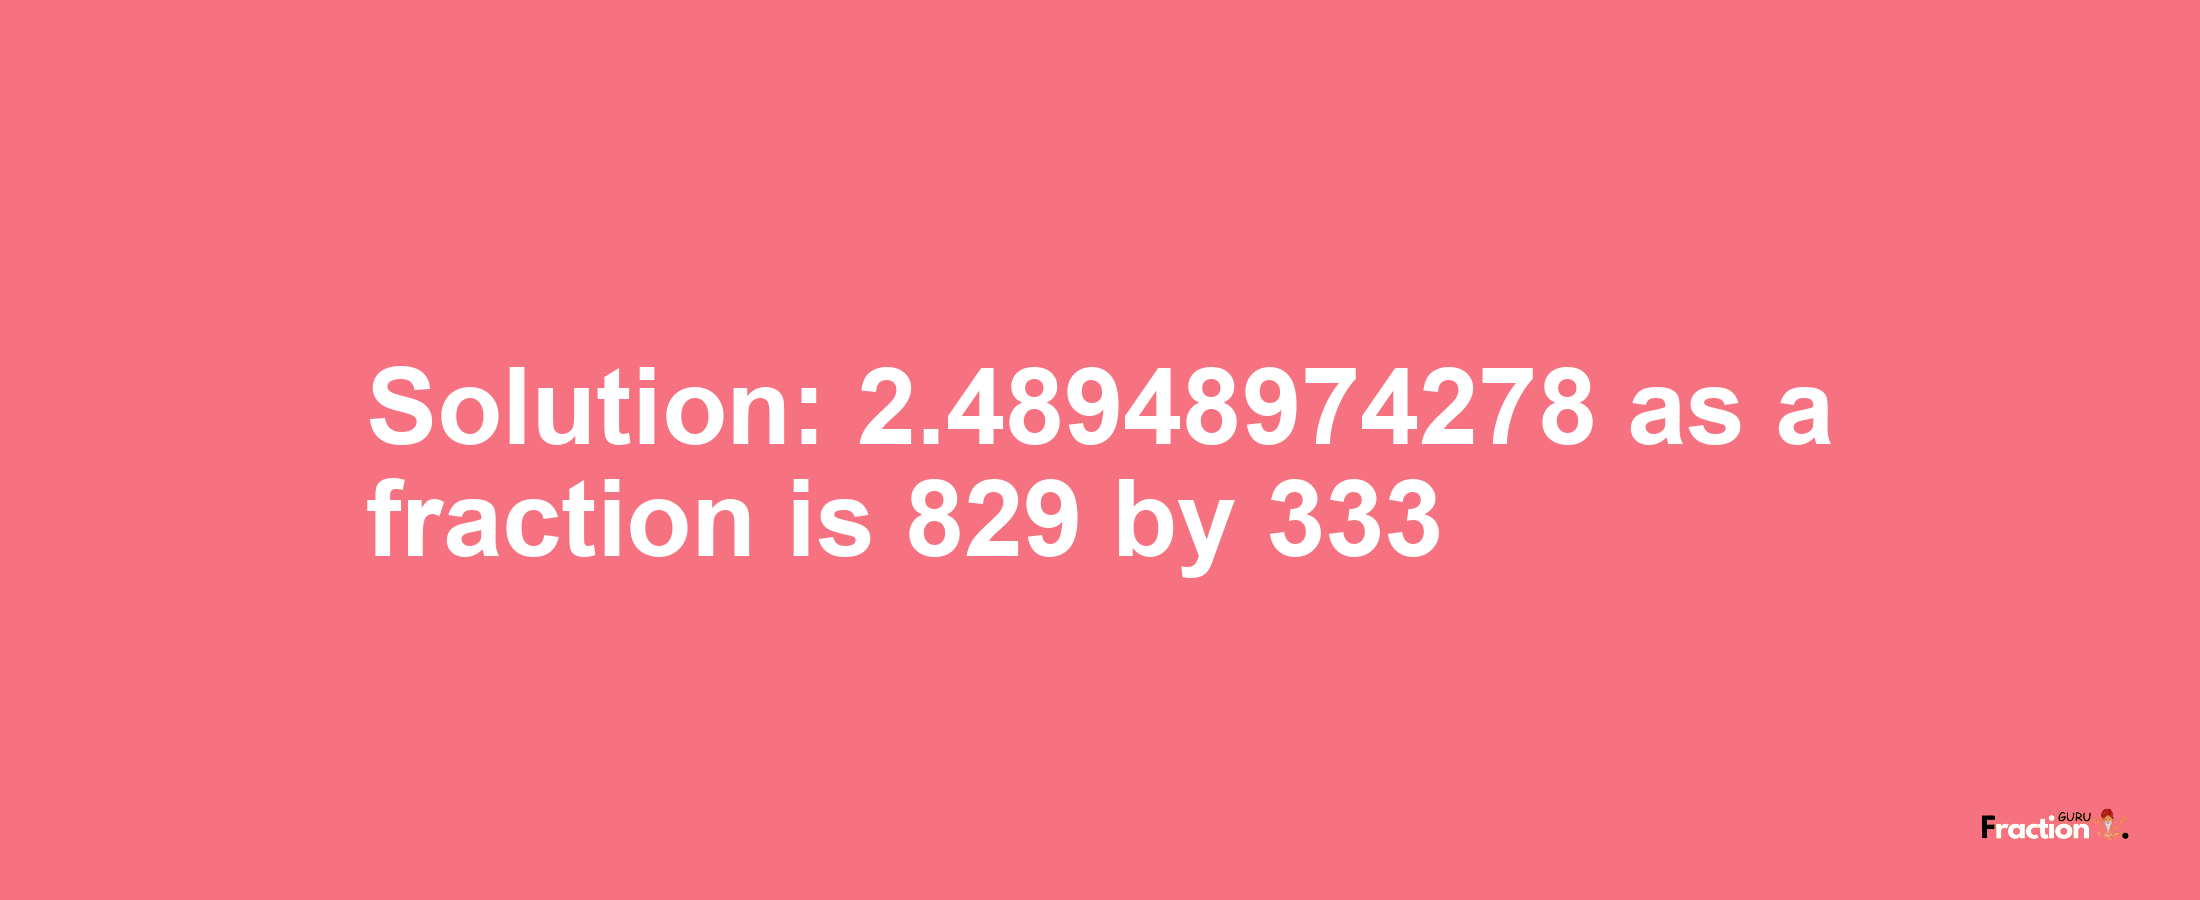 Solution:2.48948974278 as a fraction is 829/333